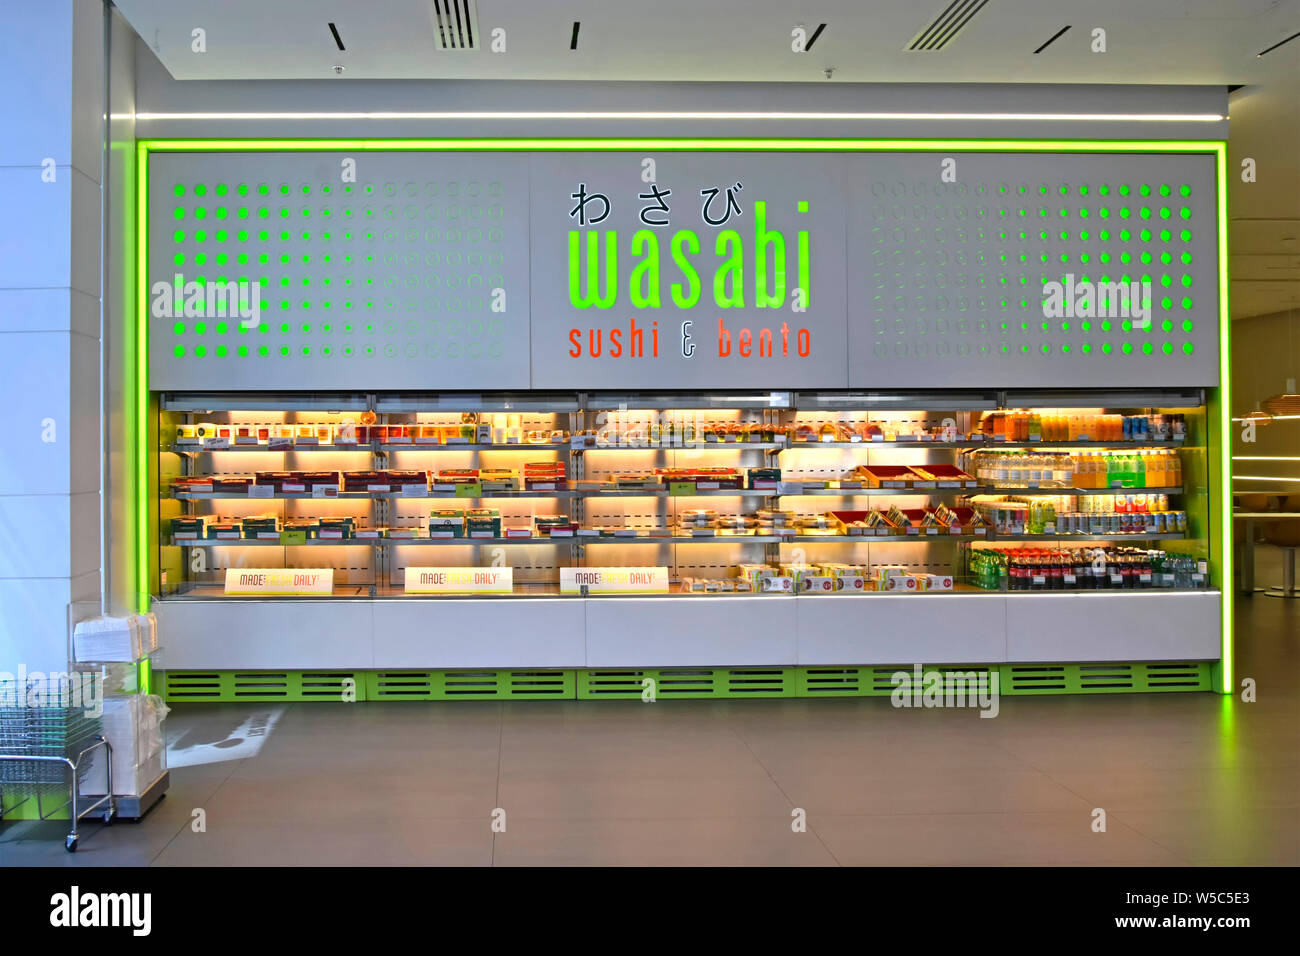 Interior of Wasabi sushi bento fast food restaurant & self service snack bar for Japanese food take away in chilled display counter London England UK Stock Photo